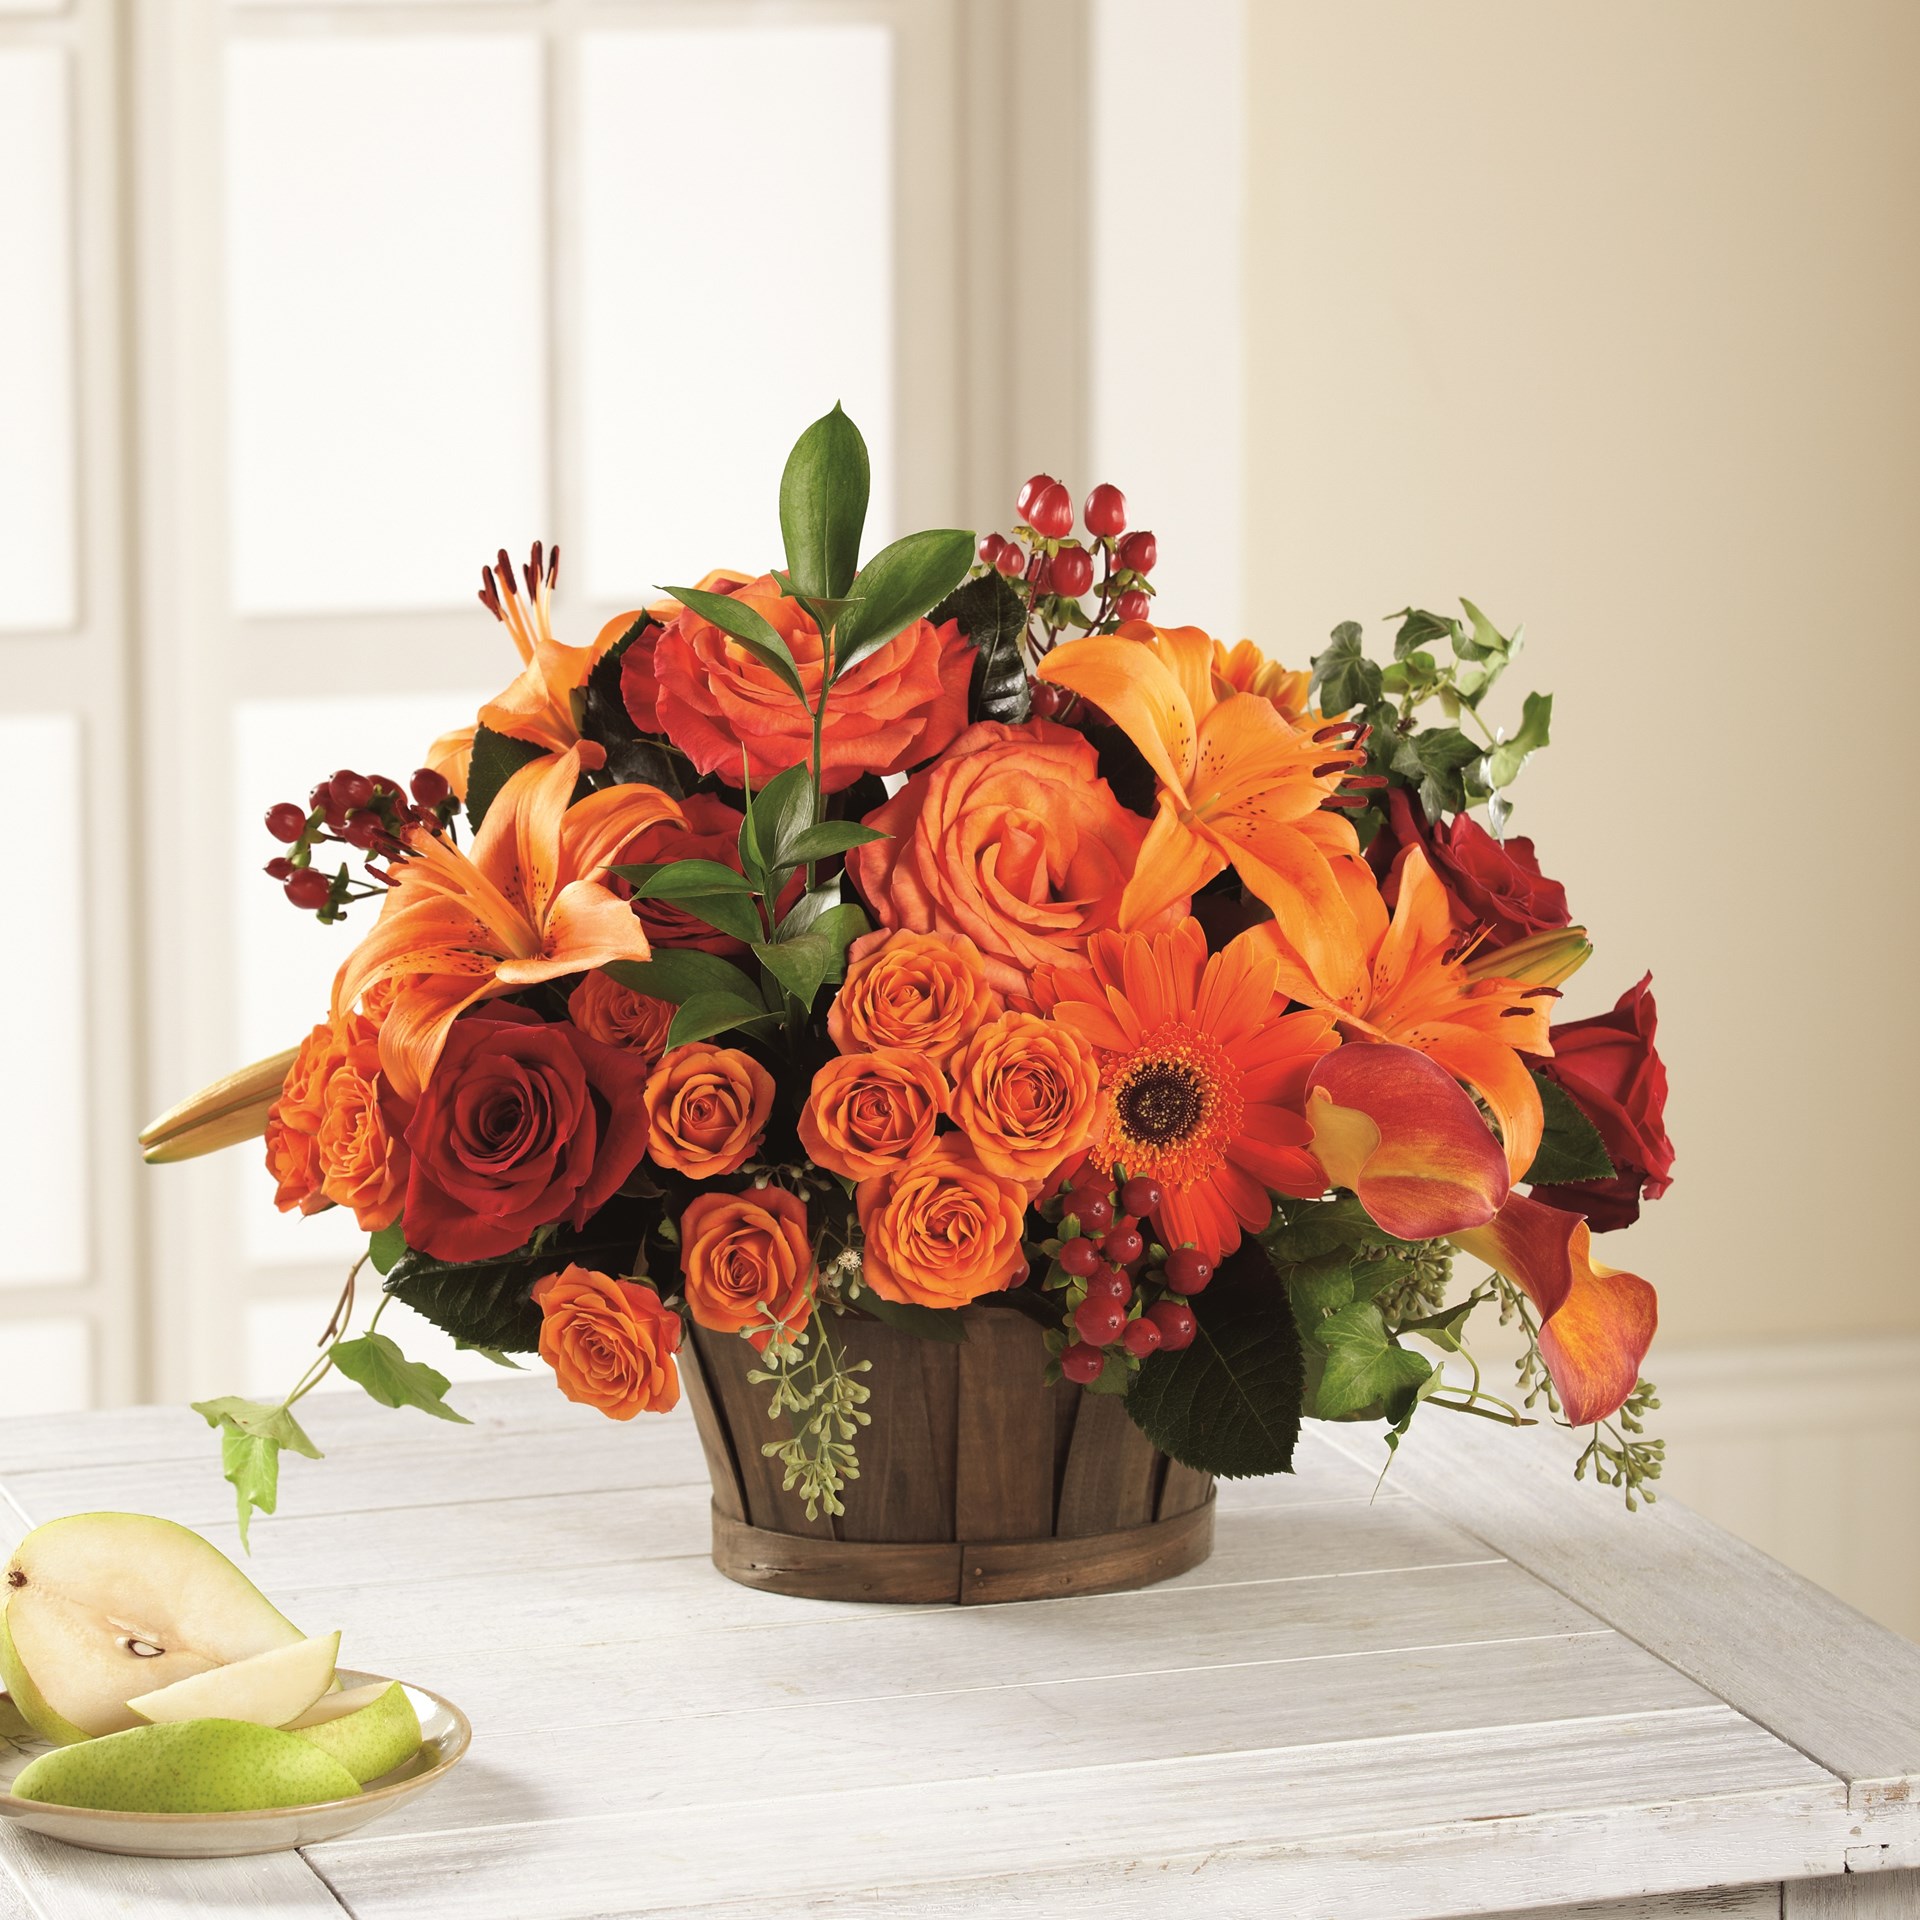 product image for The FTD Natures Bounty Bouquet